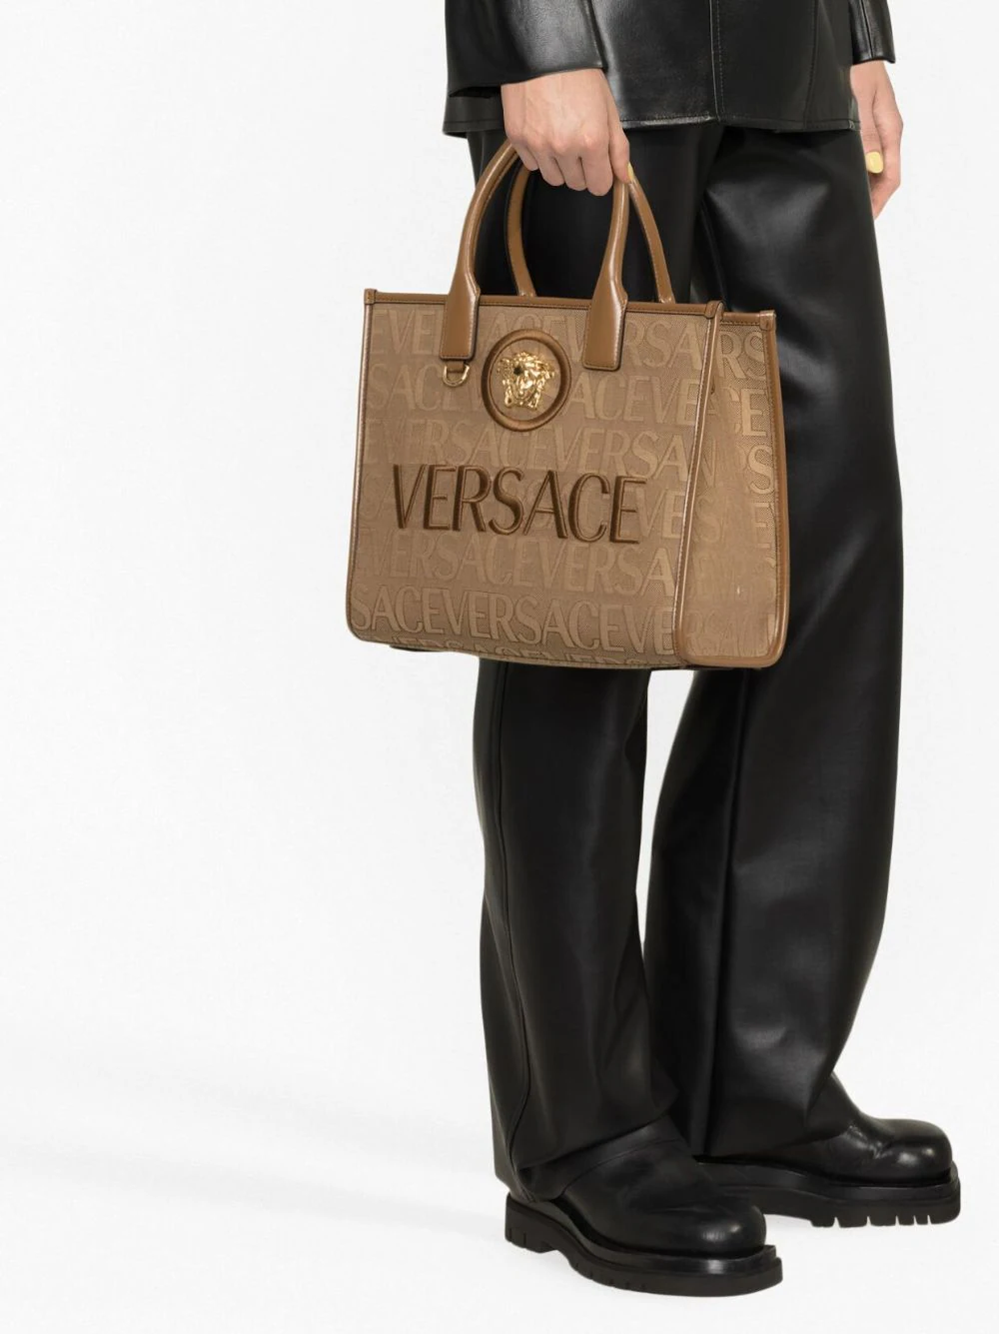 versace Versace Allover Small Tote Bag available on   - 29441 - VA